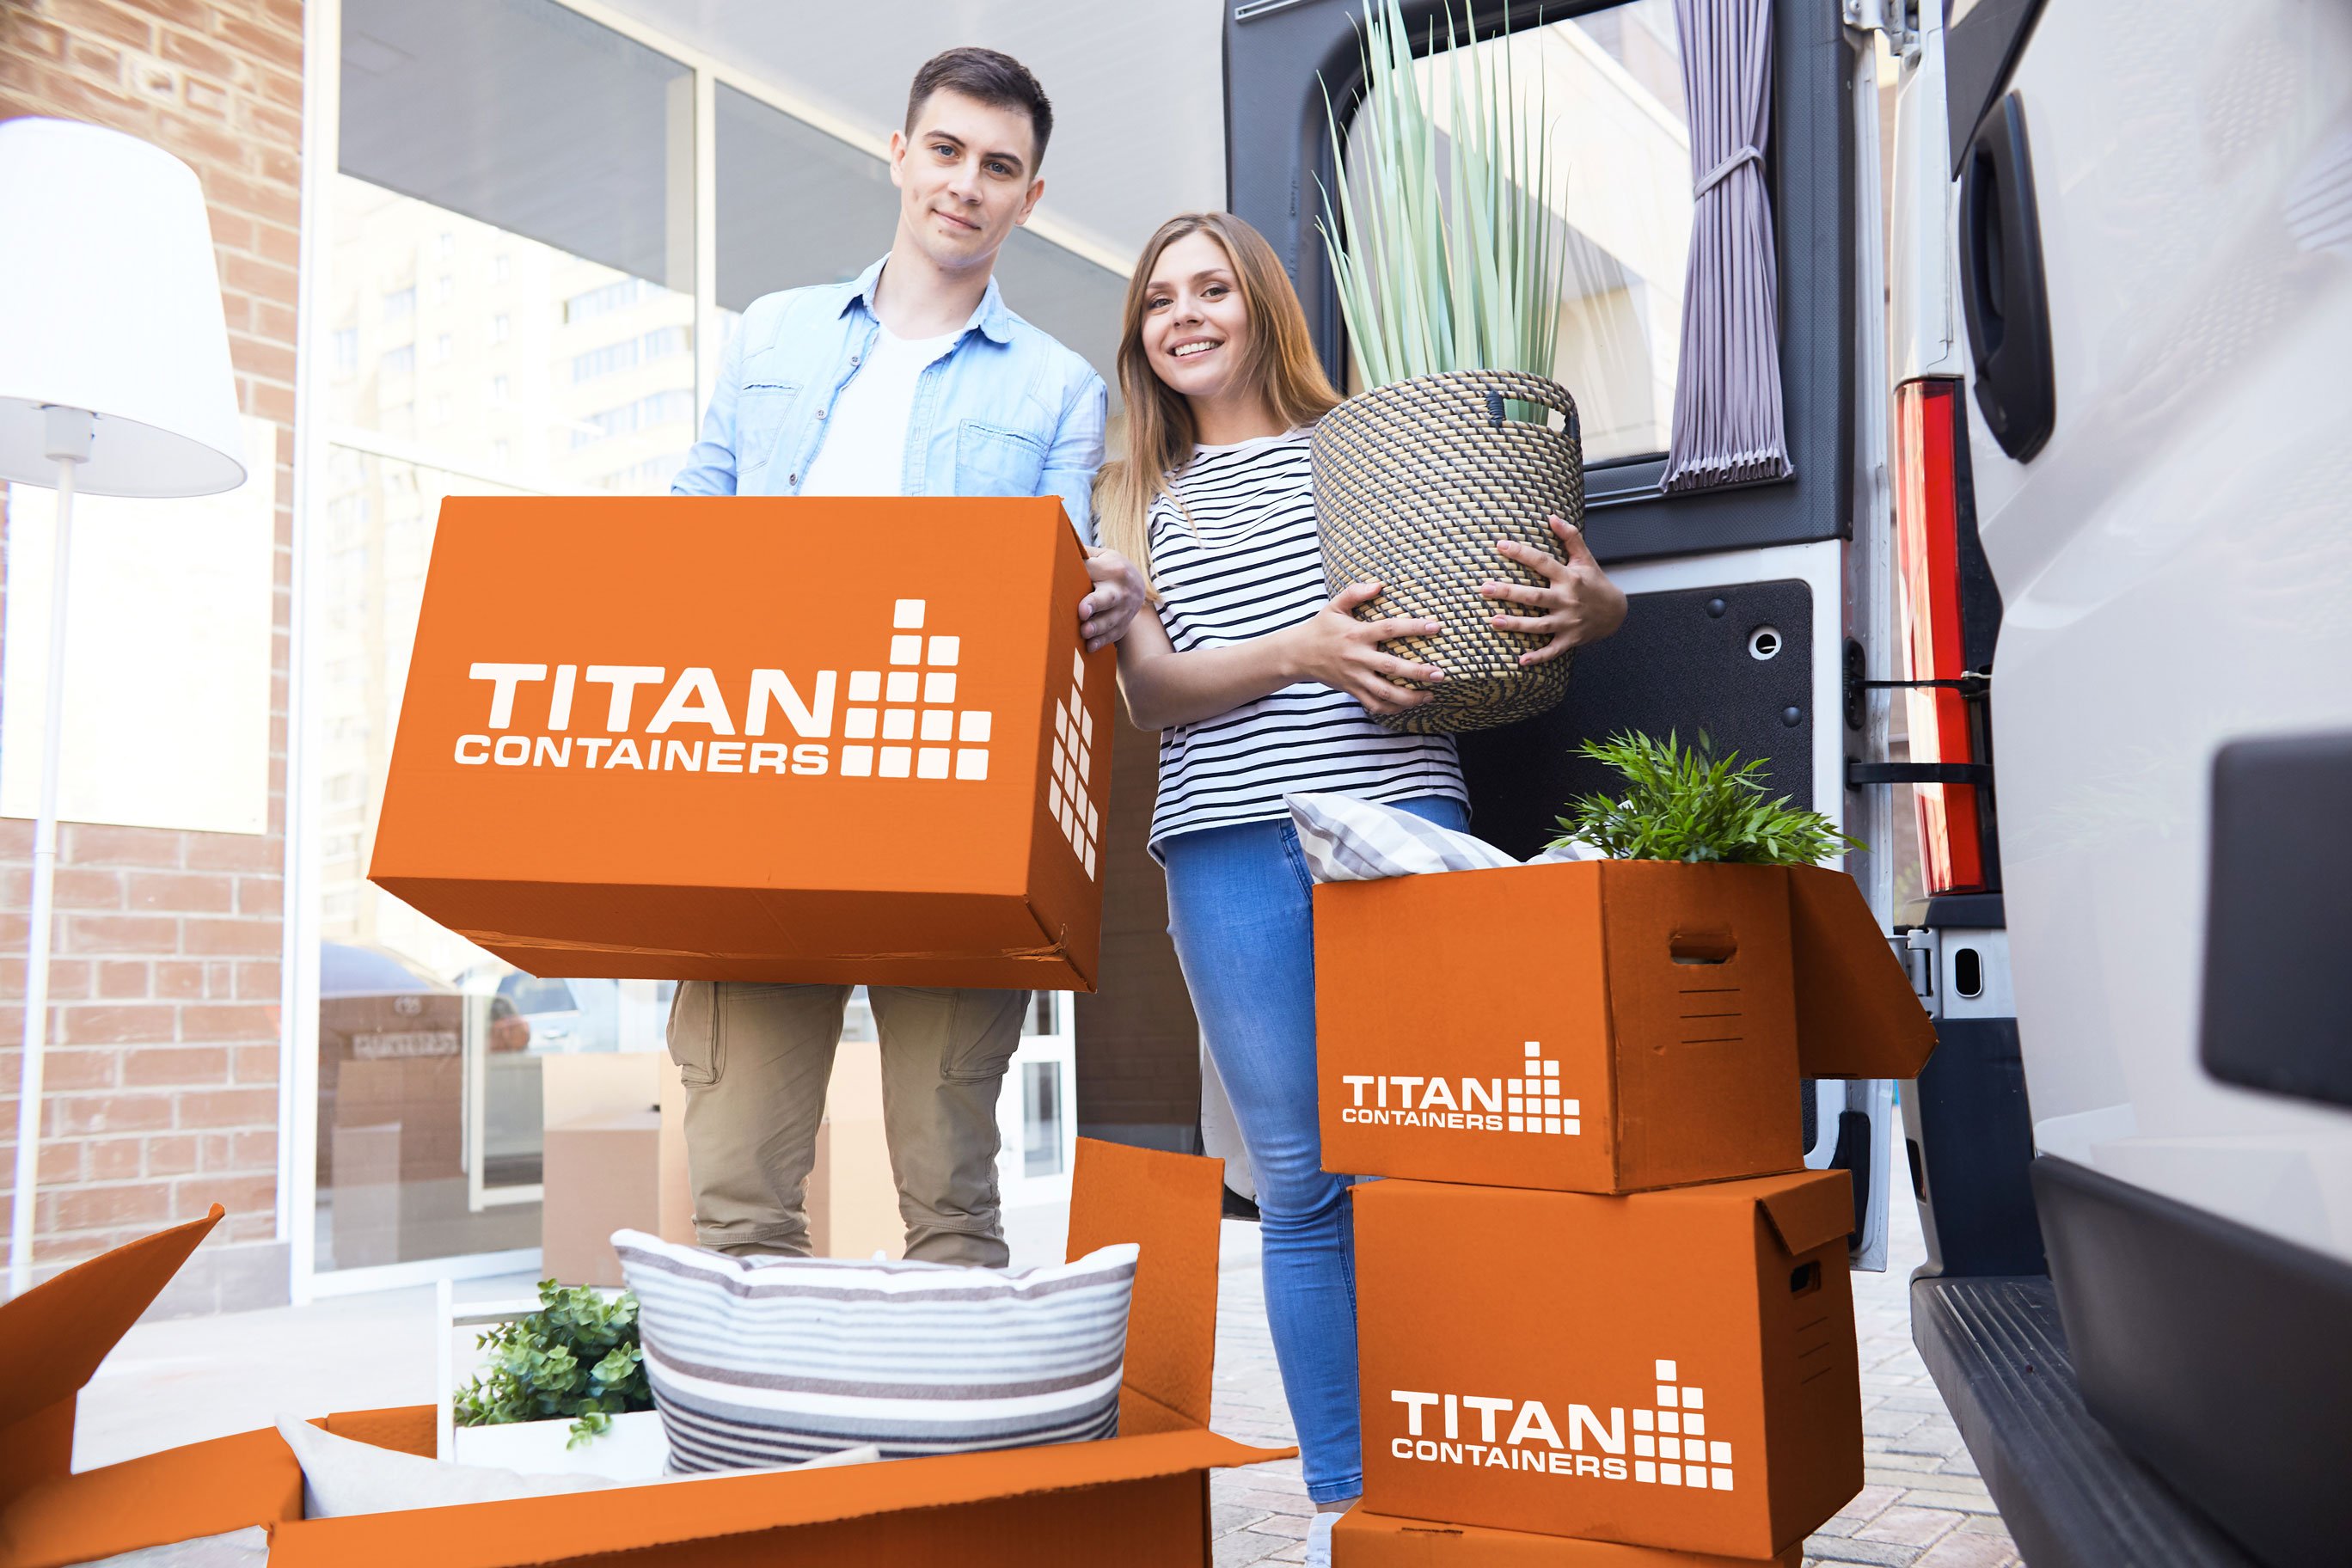 couple-with-TITAN Container Self Storage boxes